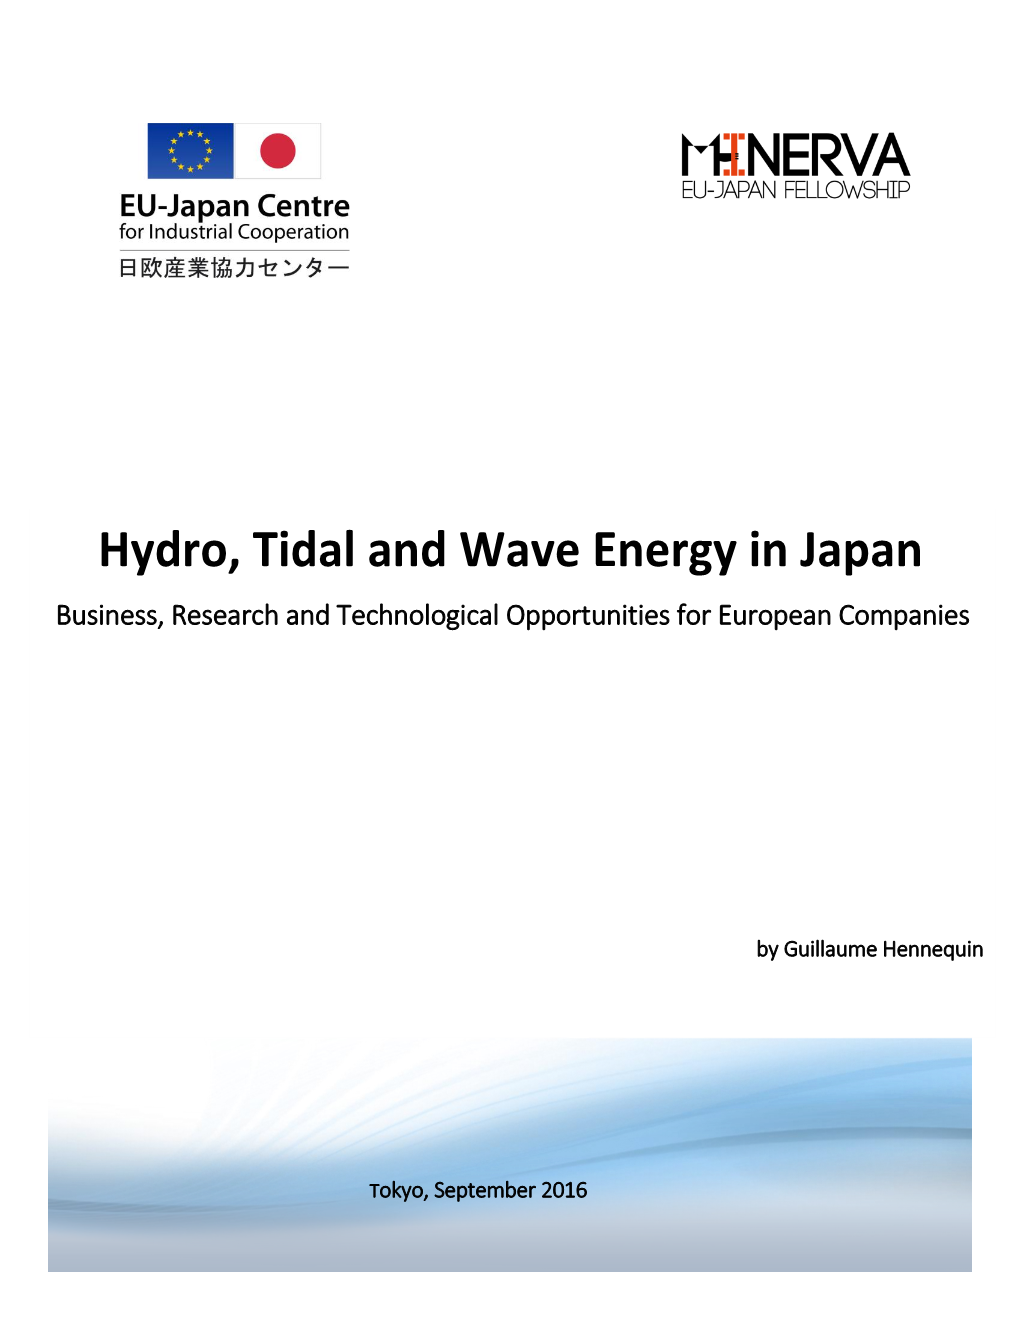 Hydro, Tidal and Wave Energy in Japan Business, Research and Technological Opportunities for European Companies